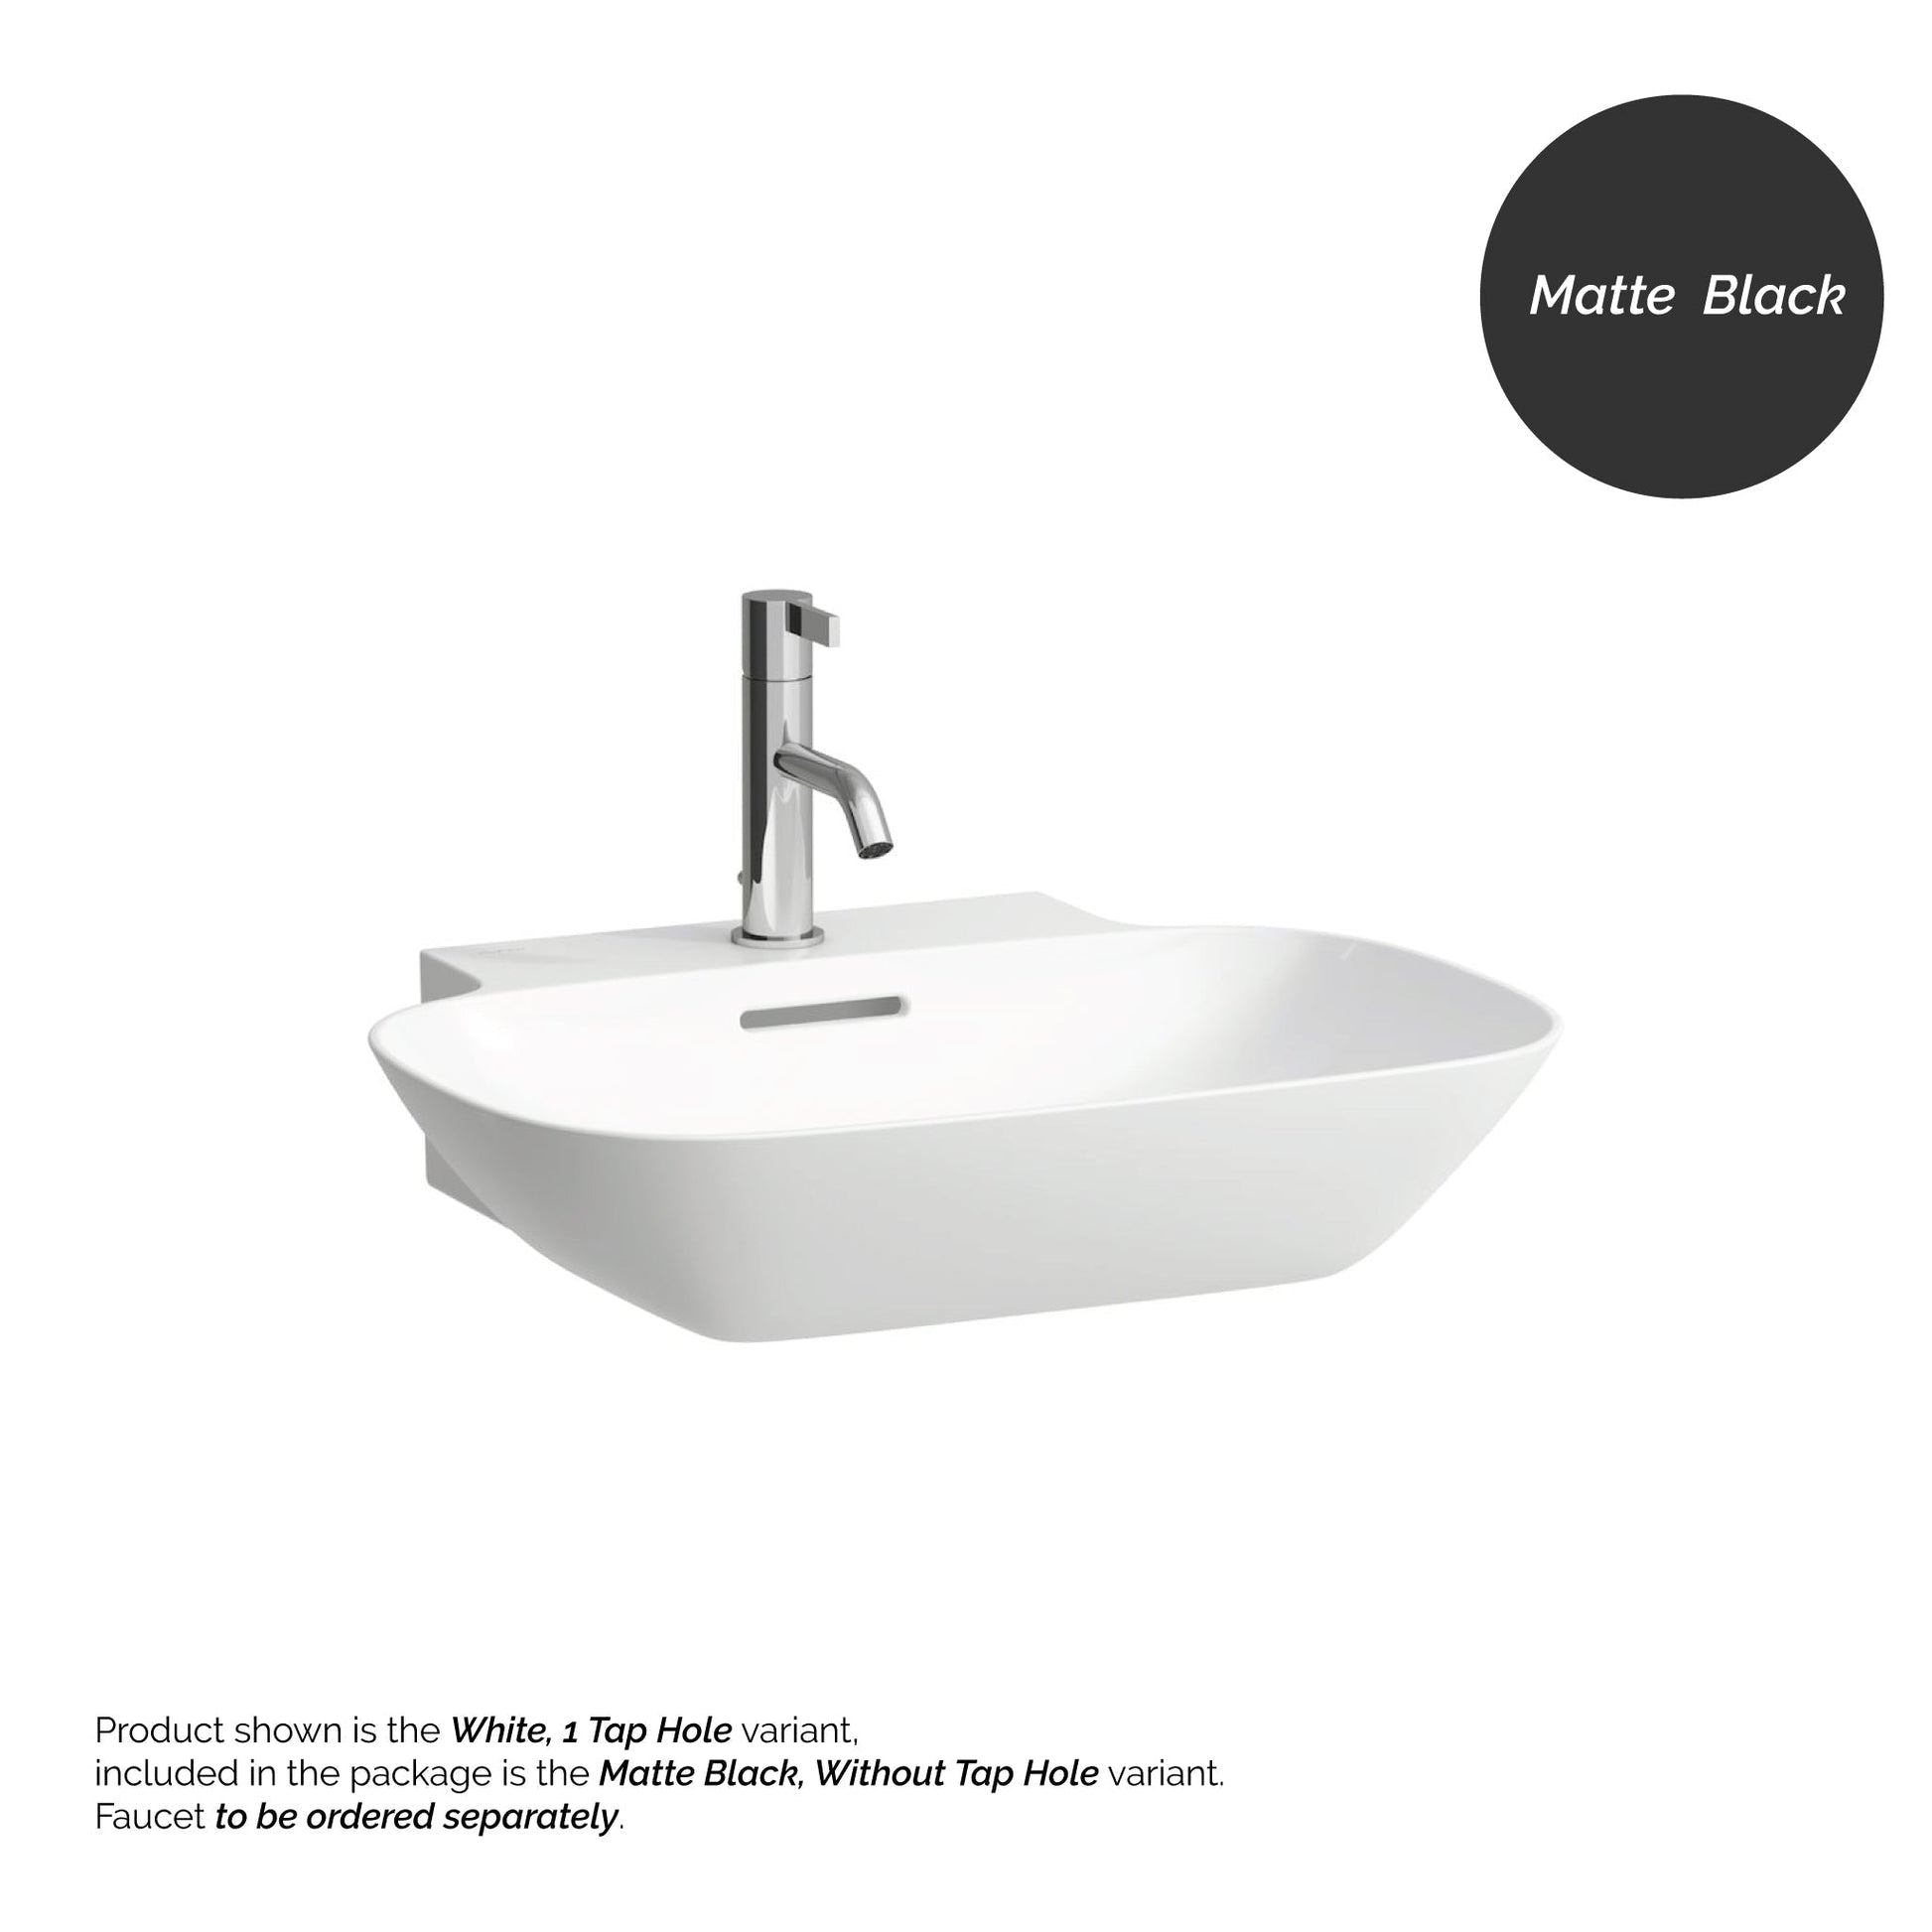 Laufen Ino 22" x 18" Rectangular Matte Black Wall-Mounted Bathroom Sink Without Faucet Hole